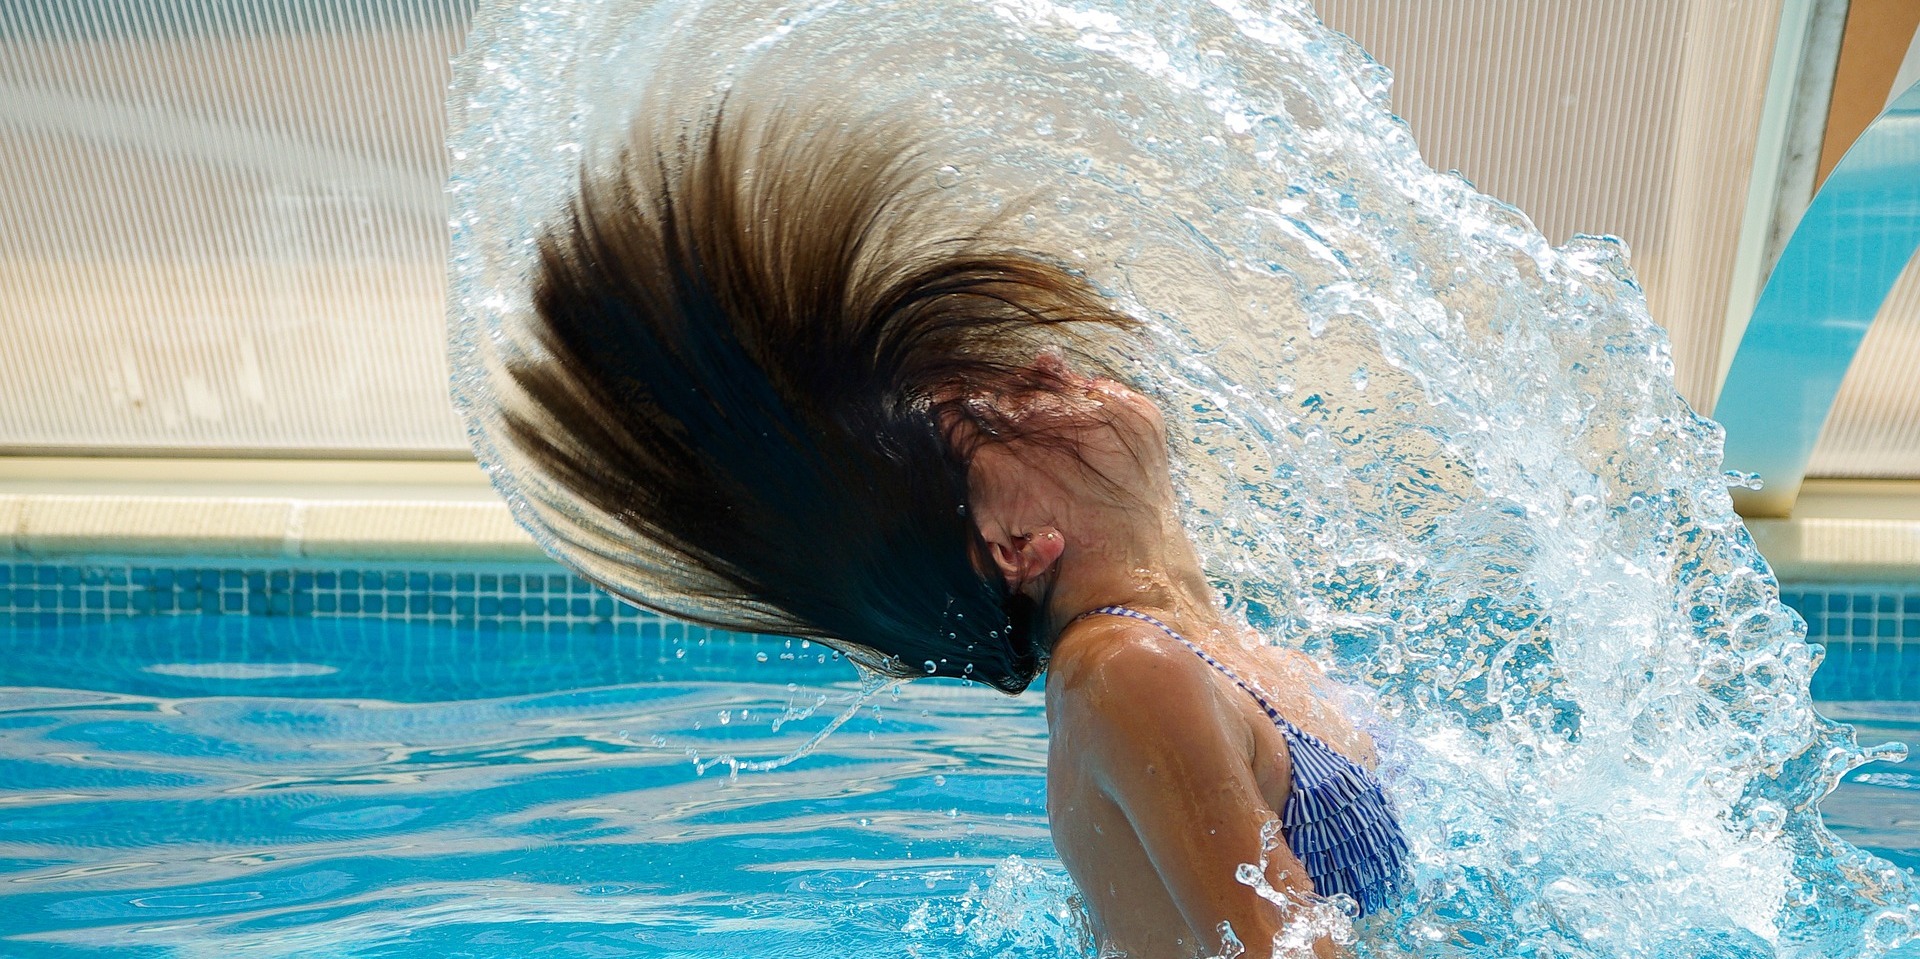 Lady throwing hair back in swimming pool